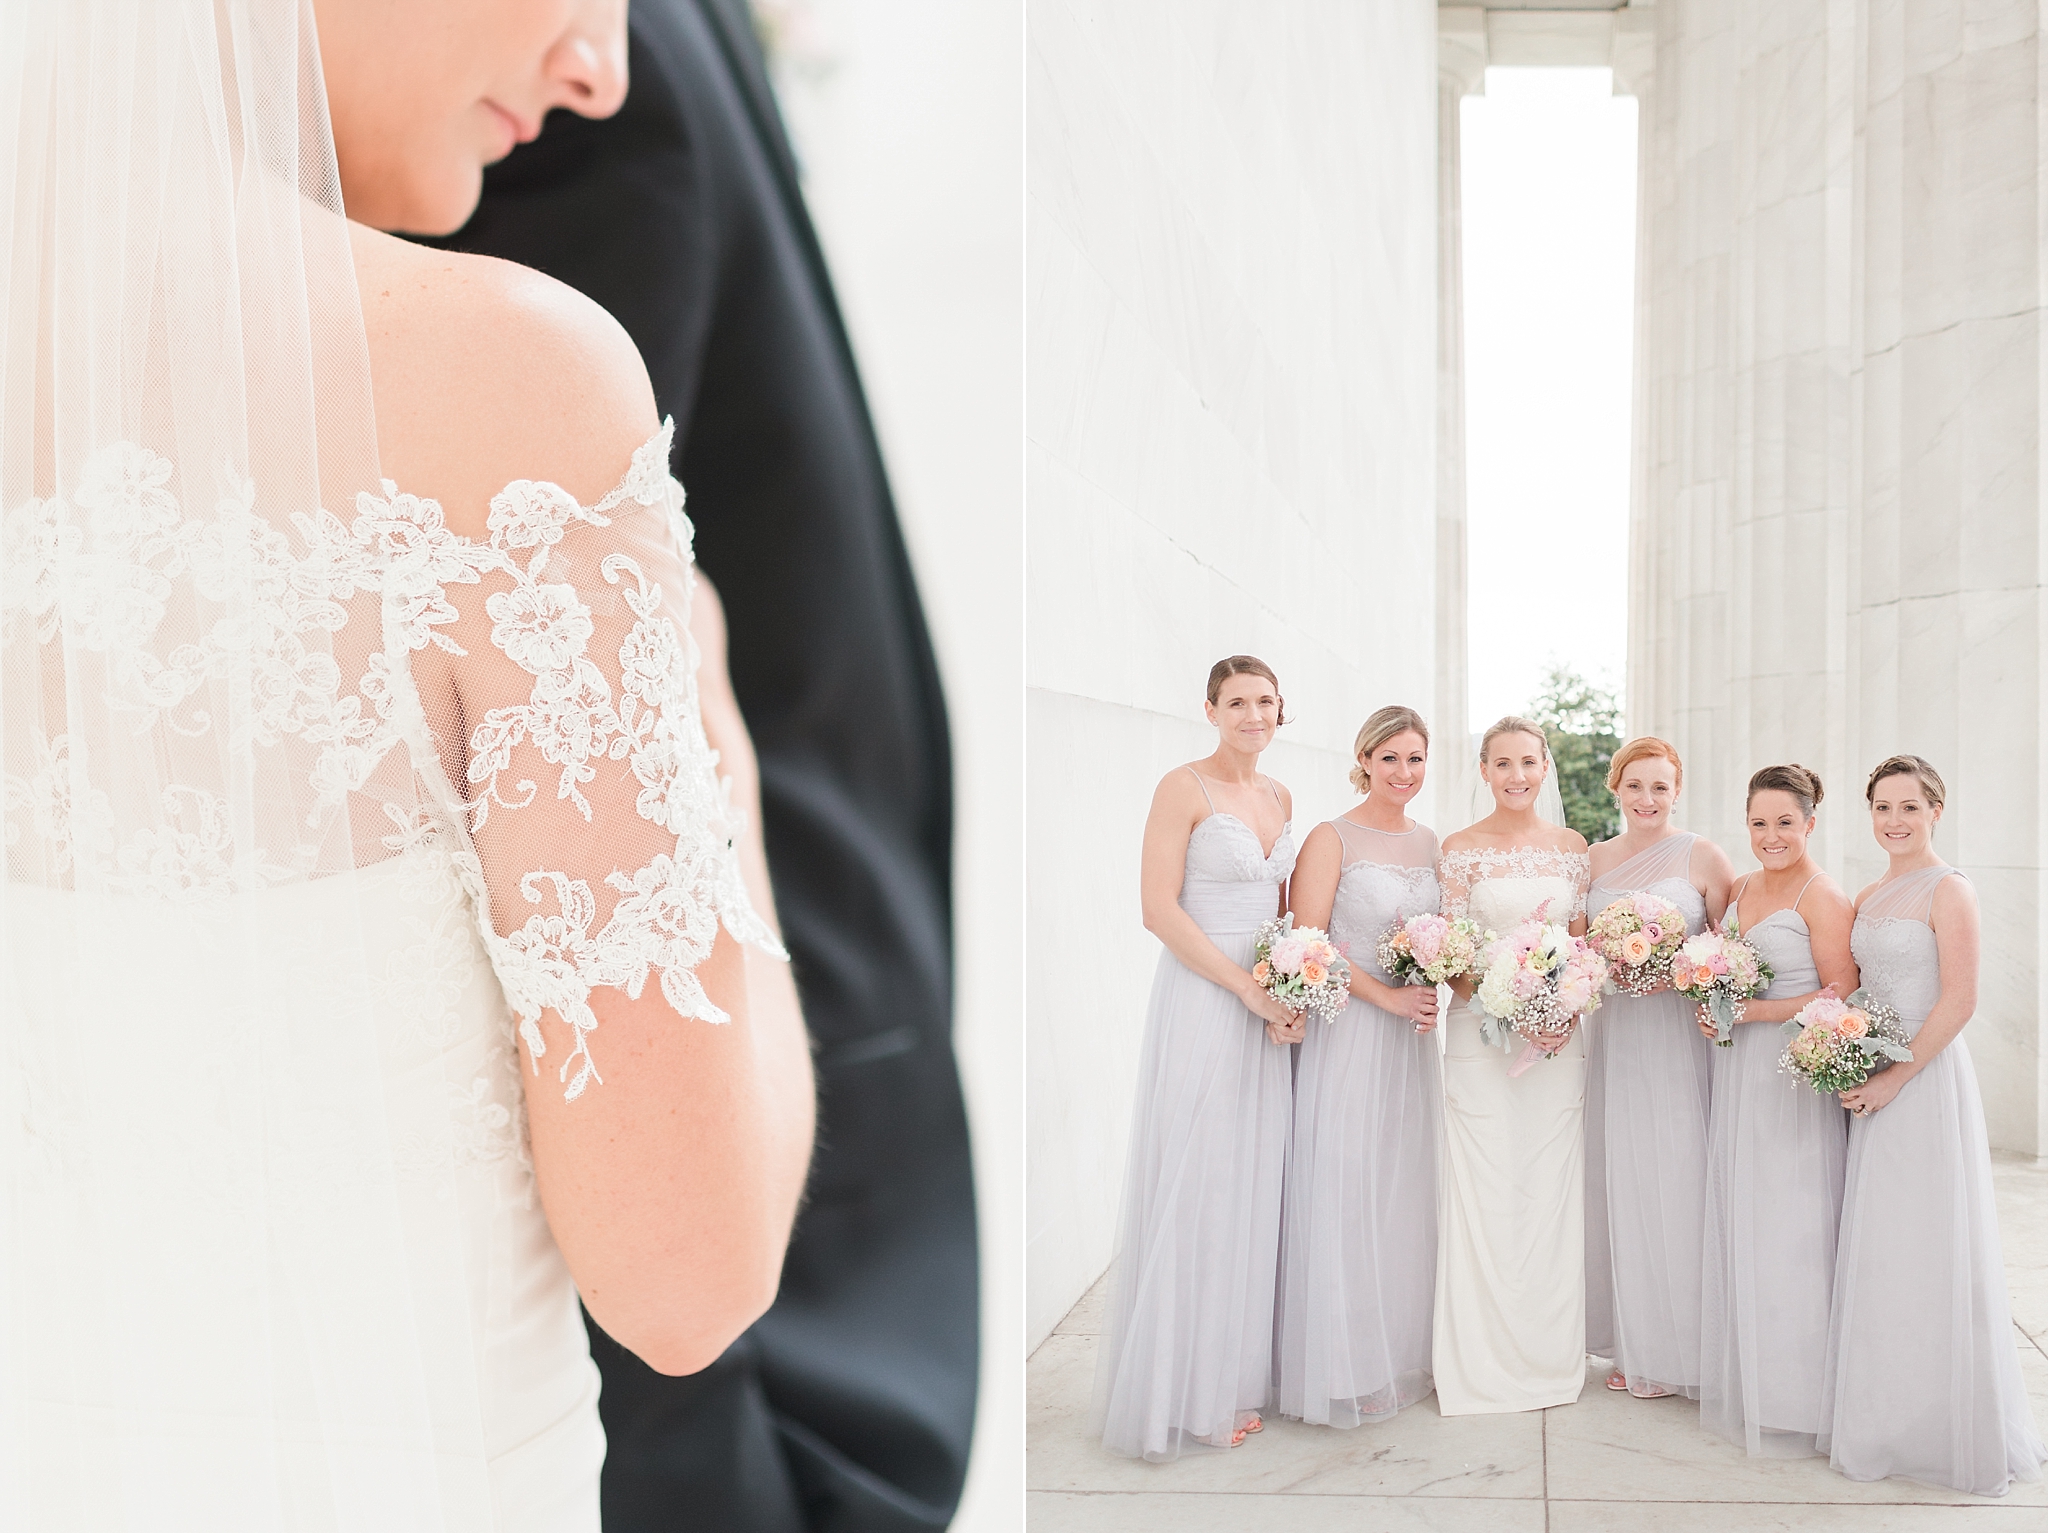 This photographer is sharing a few tips on how to plan a successful shoot amongst some of DC's most iconic monuments on your wedding day!